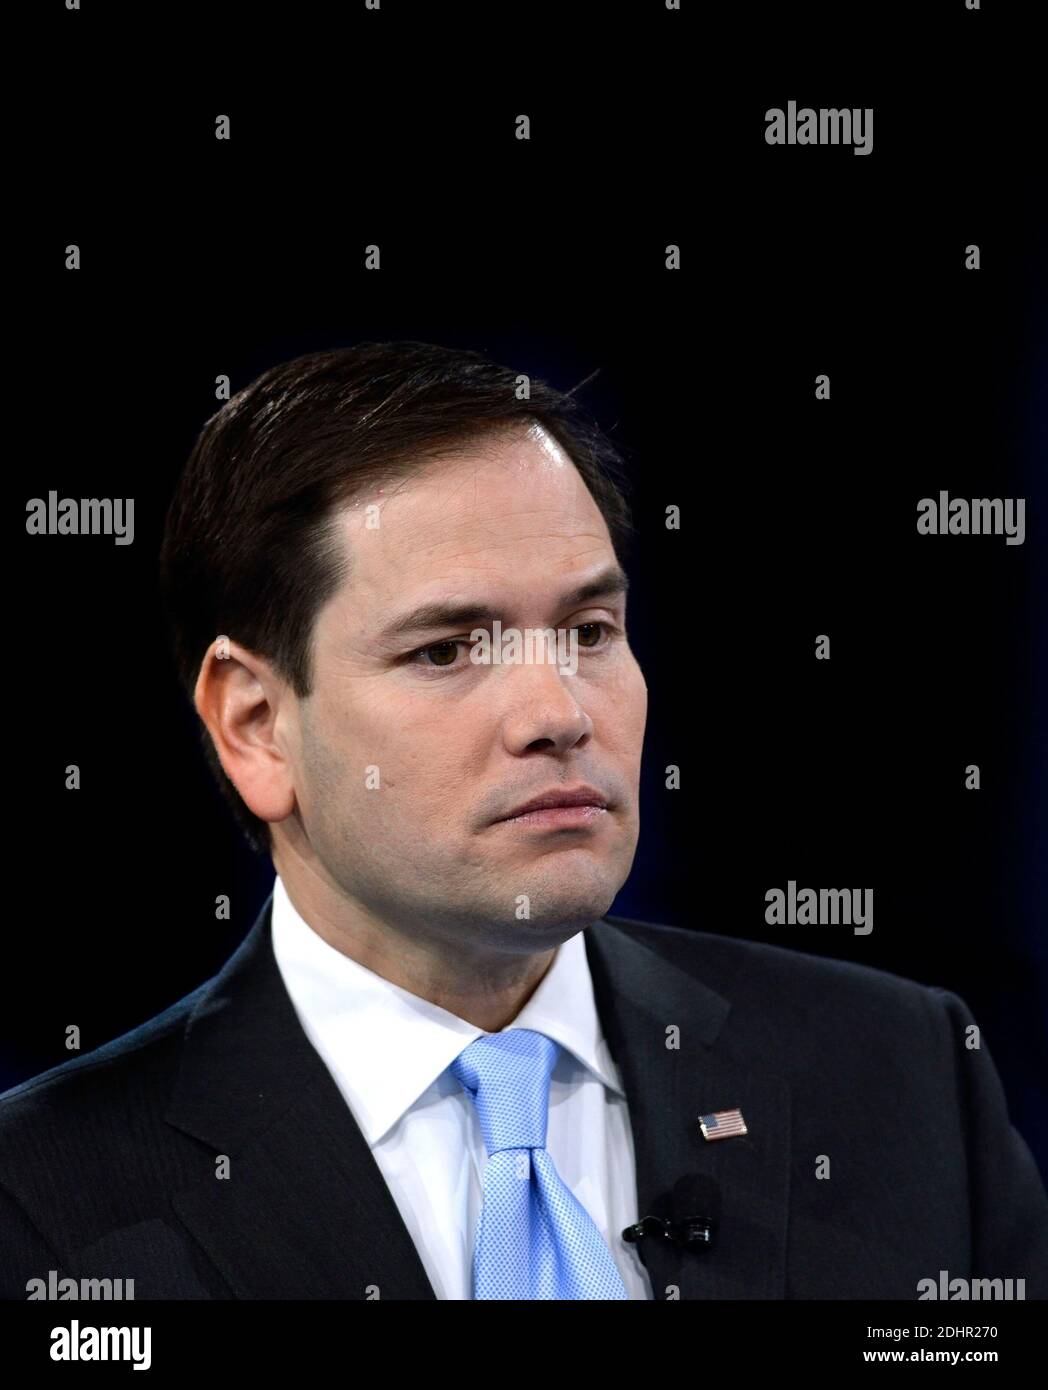 GOP Presidential candidate Marco Rubio speaks during CPAC 2016 March 4, 2016 in National Harbor, Maryland. The American Conservative Union hosted its annual Conservative Political Action Conference to discuss conservative issues. Photo by Olivier Douliery/ABACAPRESS.COM Stock Photo